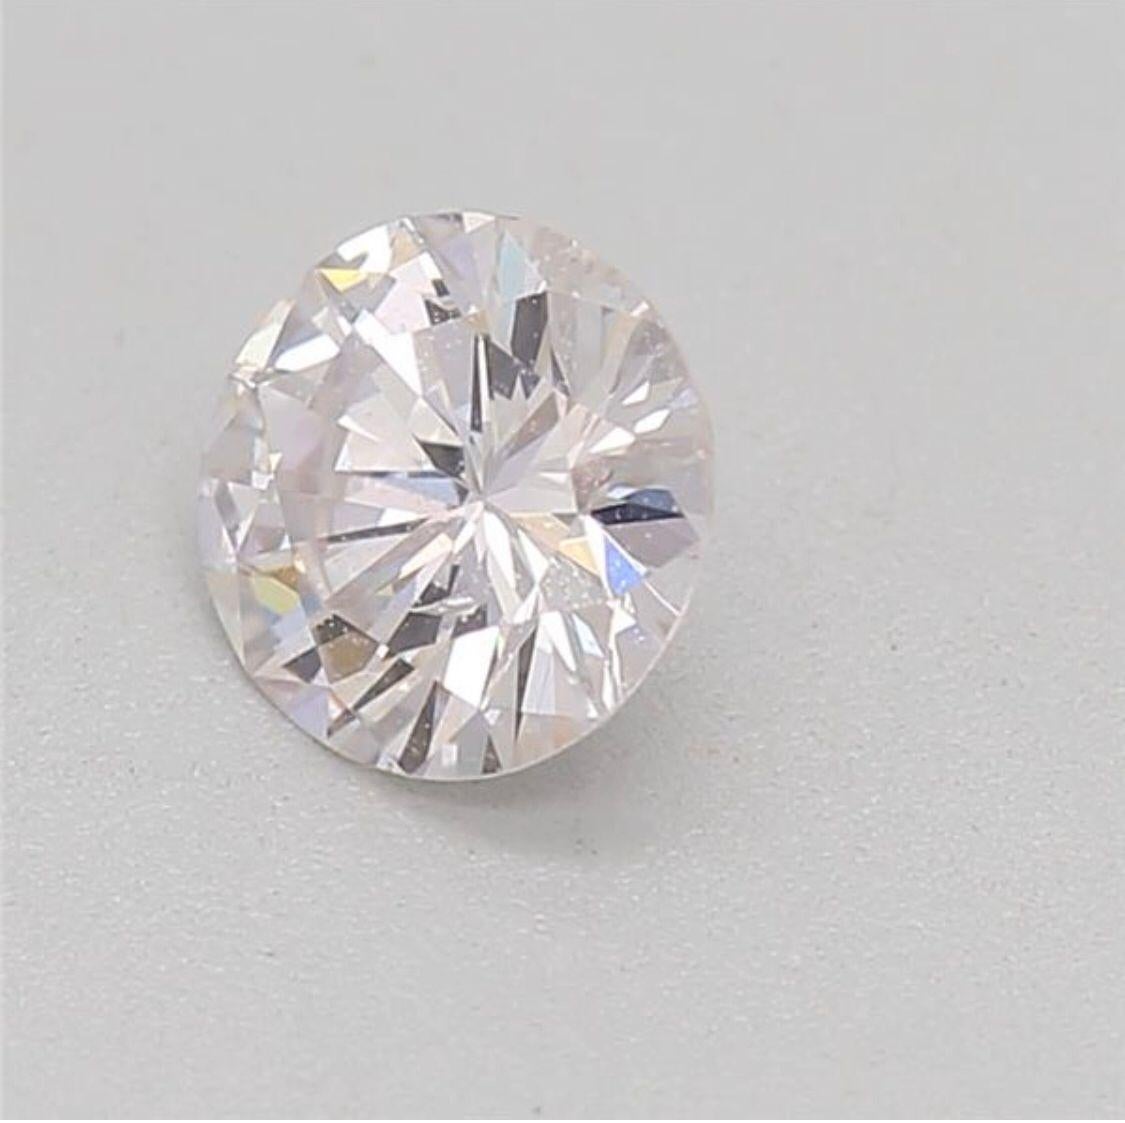 0.31 Carat Faint Pink Round Cut Diamond SI1 Clarity CGL Certified For Sale 8